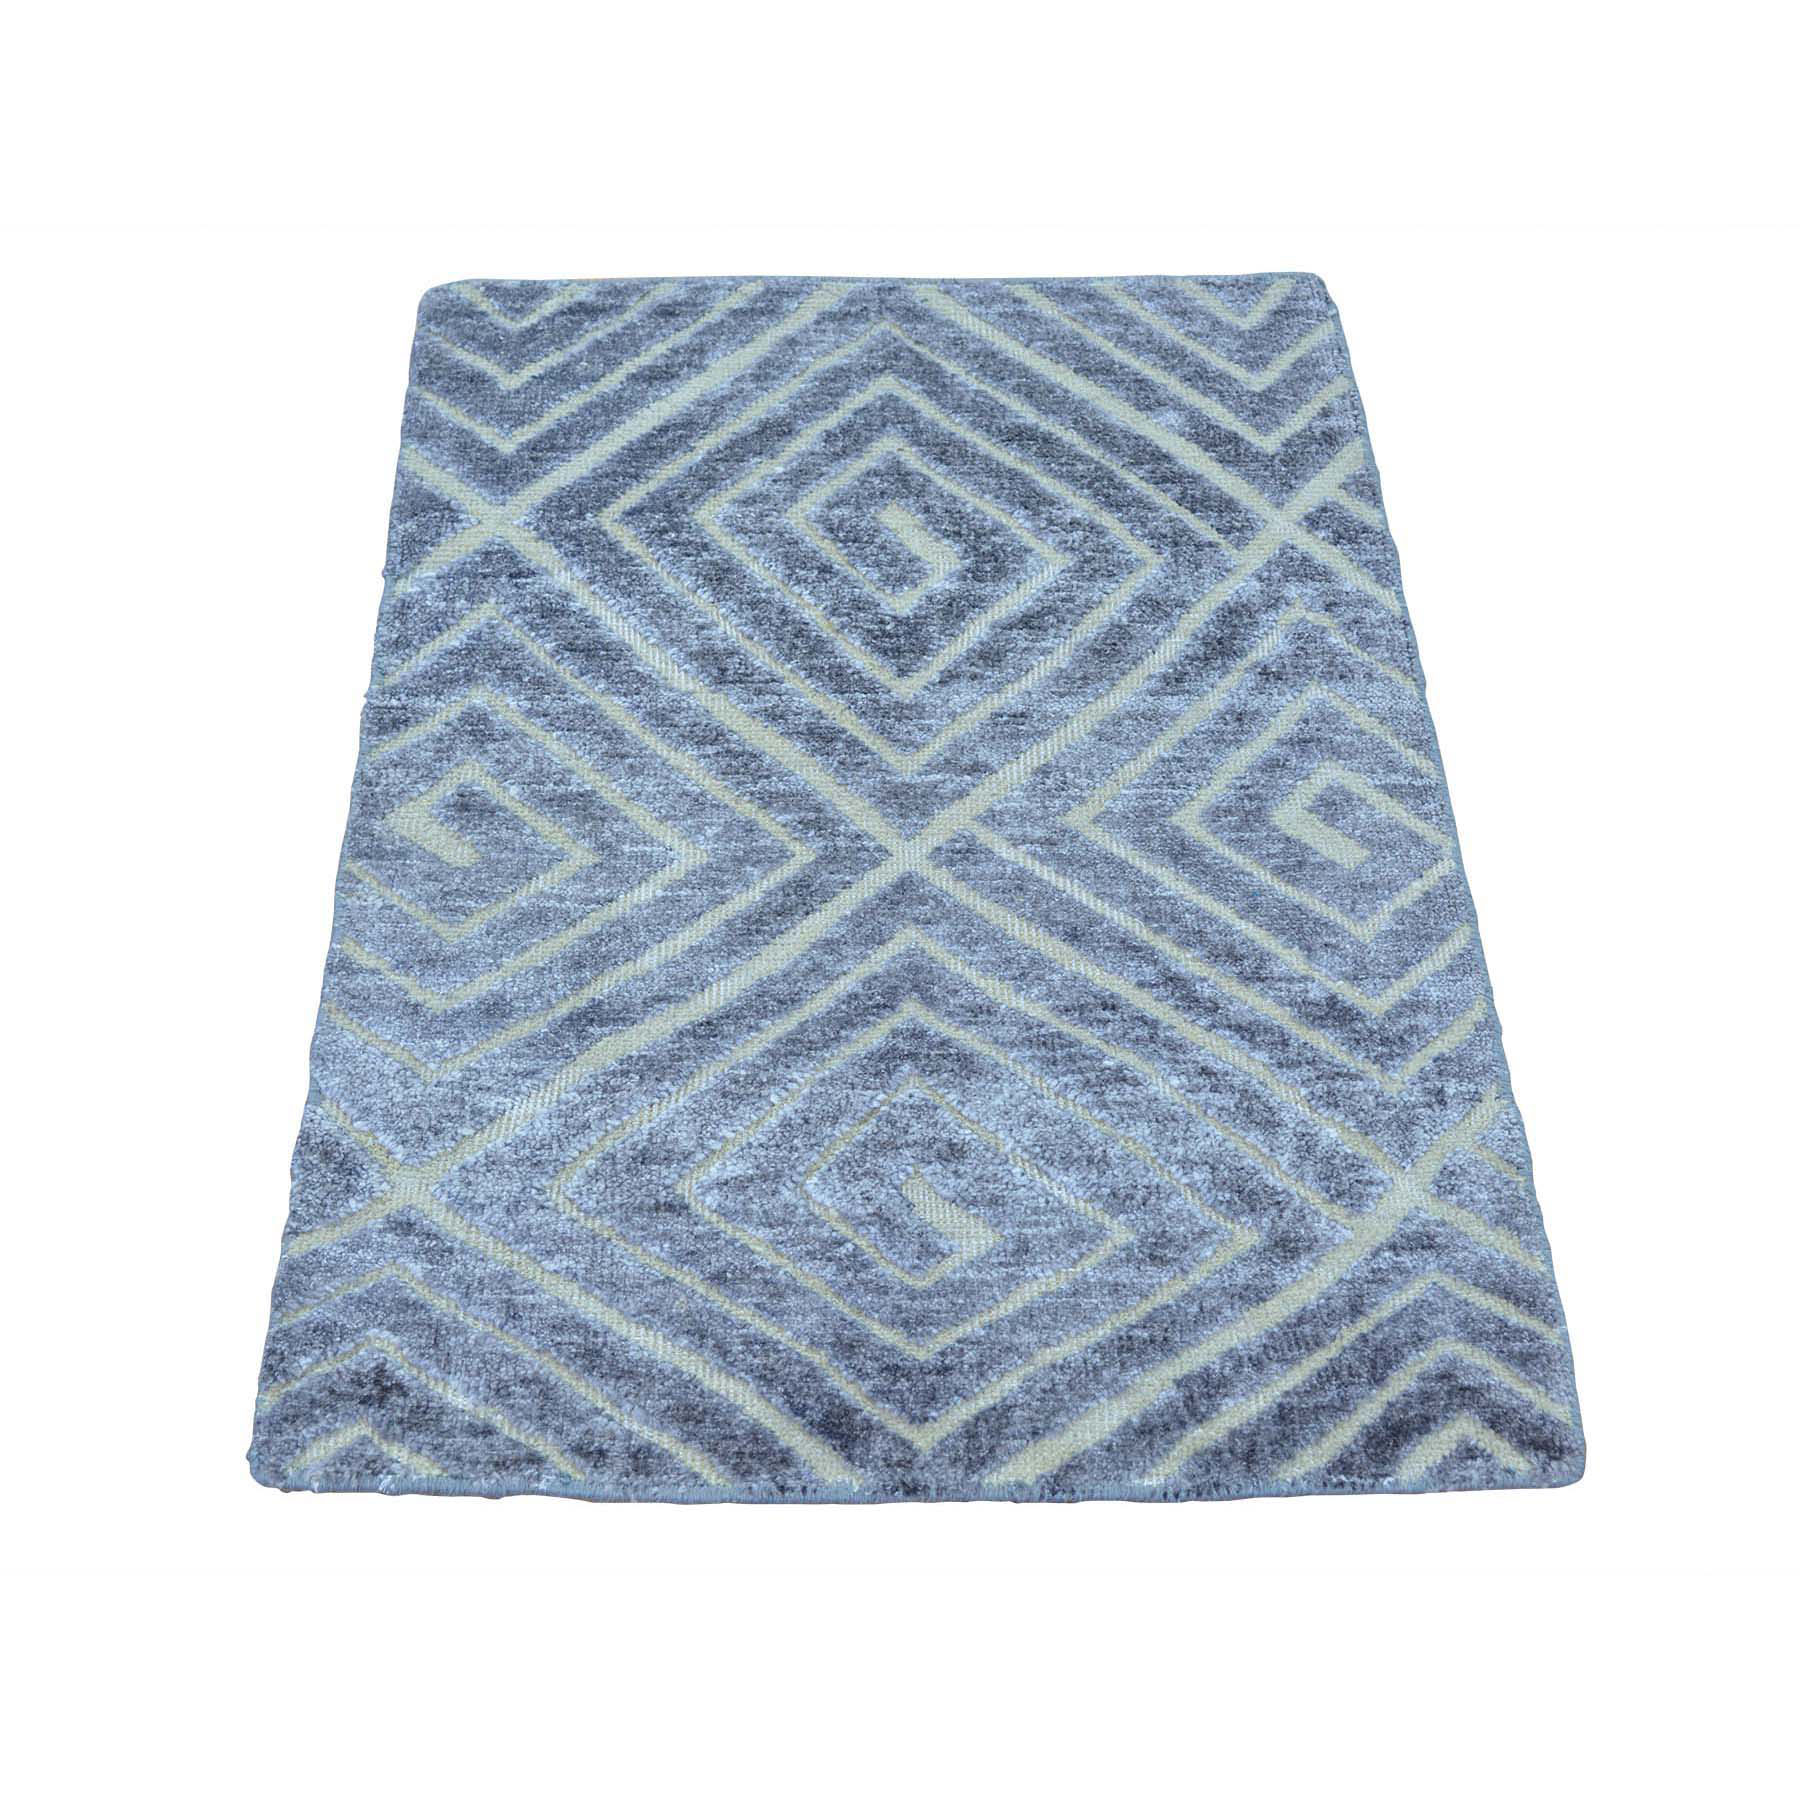 2' x 3' Wool and Silk High and Low Pile Modern Hand Woven Rug 